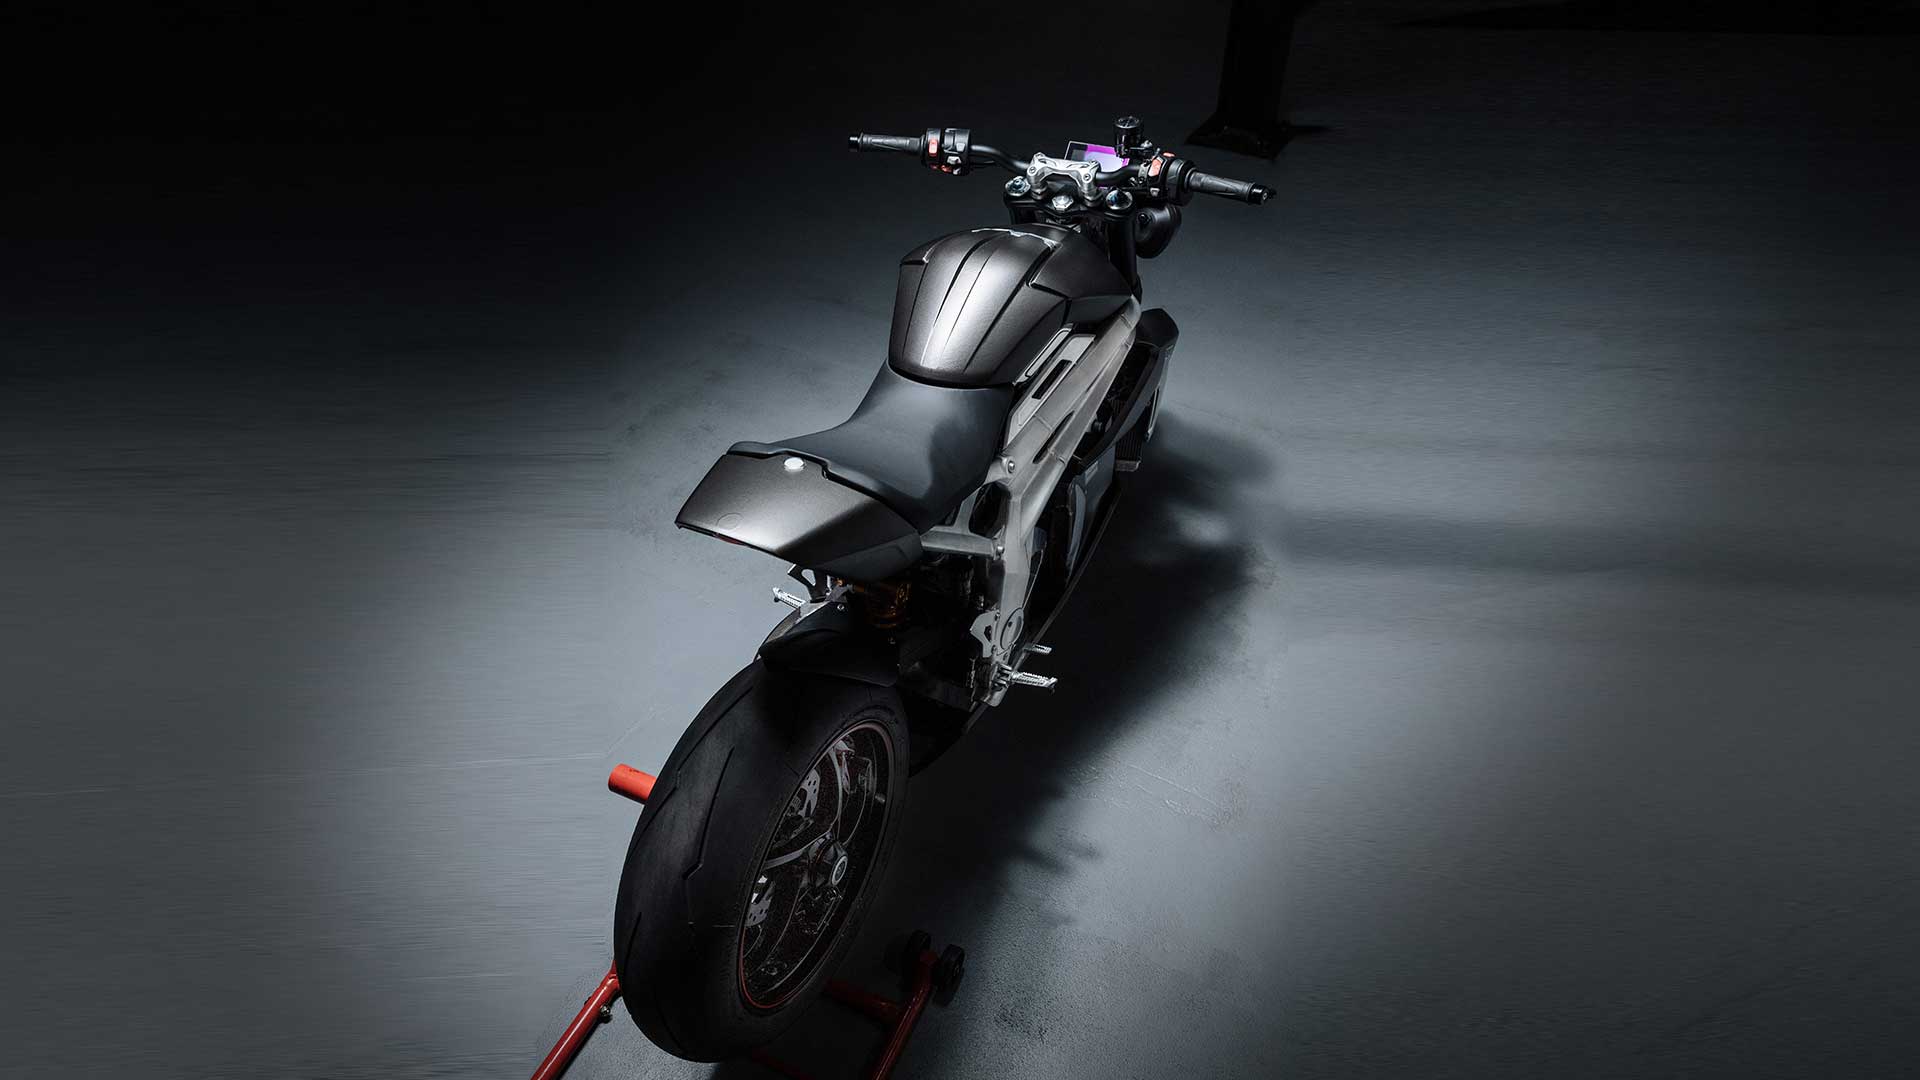 A view of Triumph's new TE-1 electric prototype, which will be further revealed July 12th.